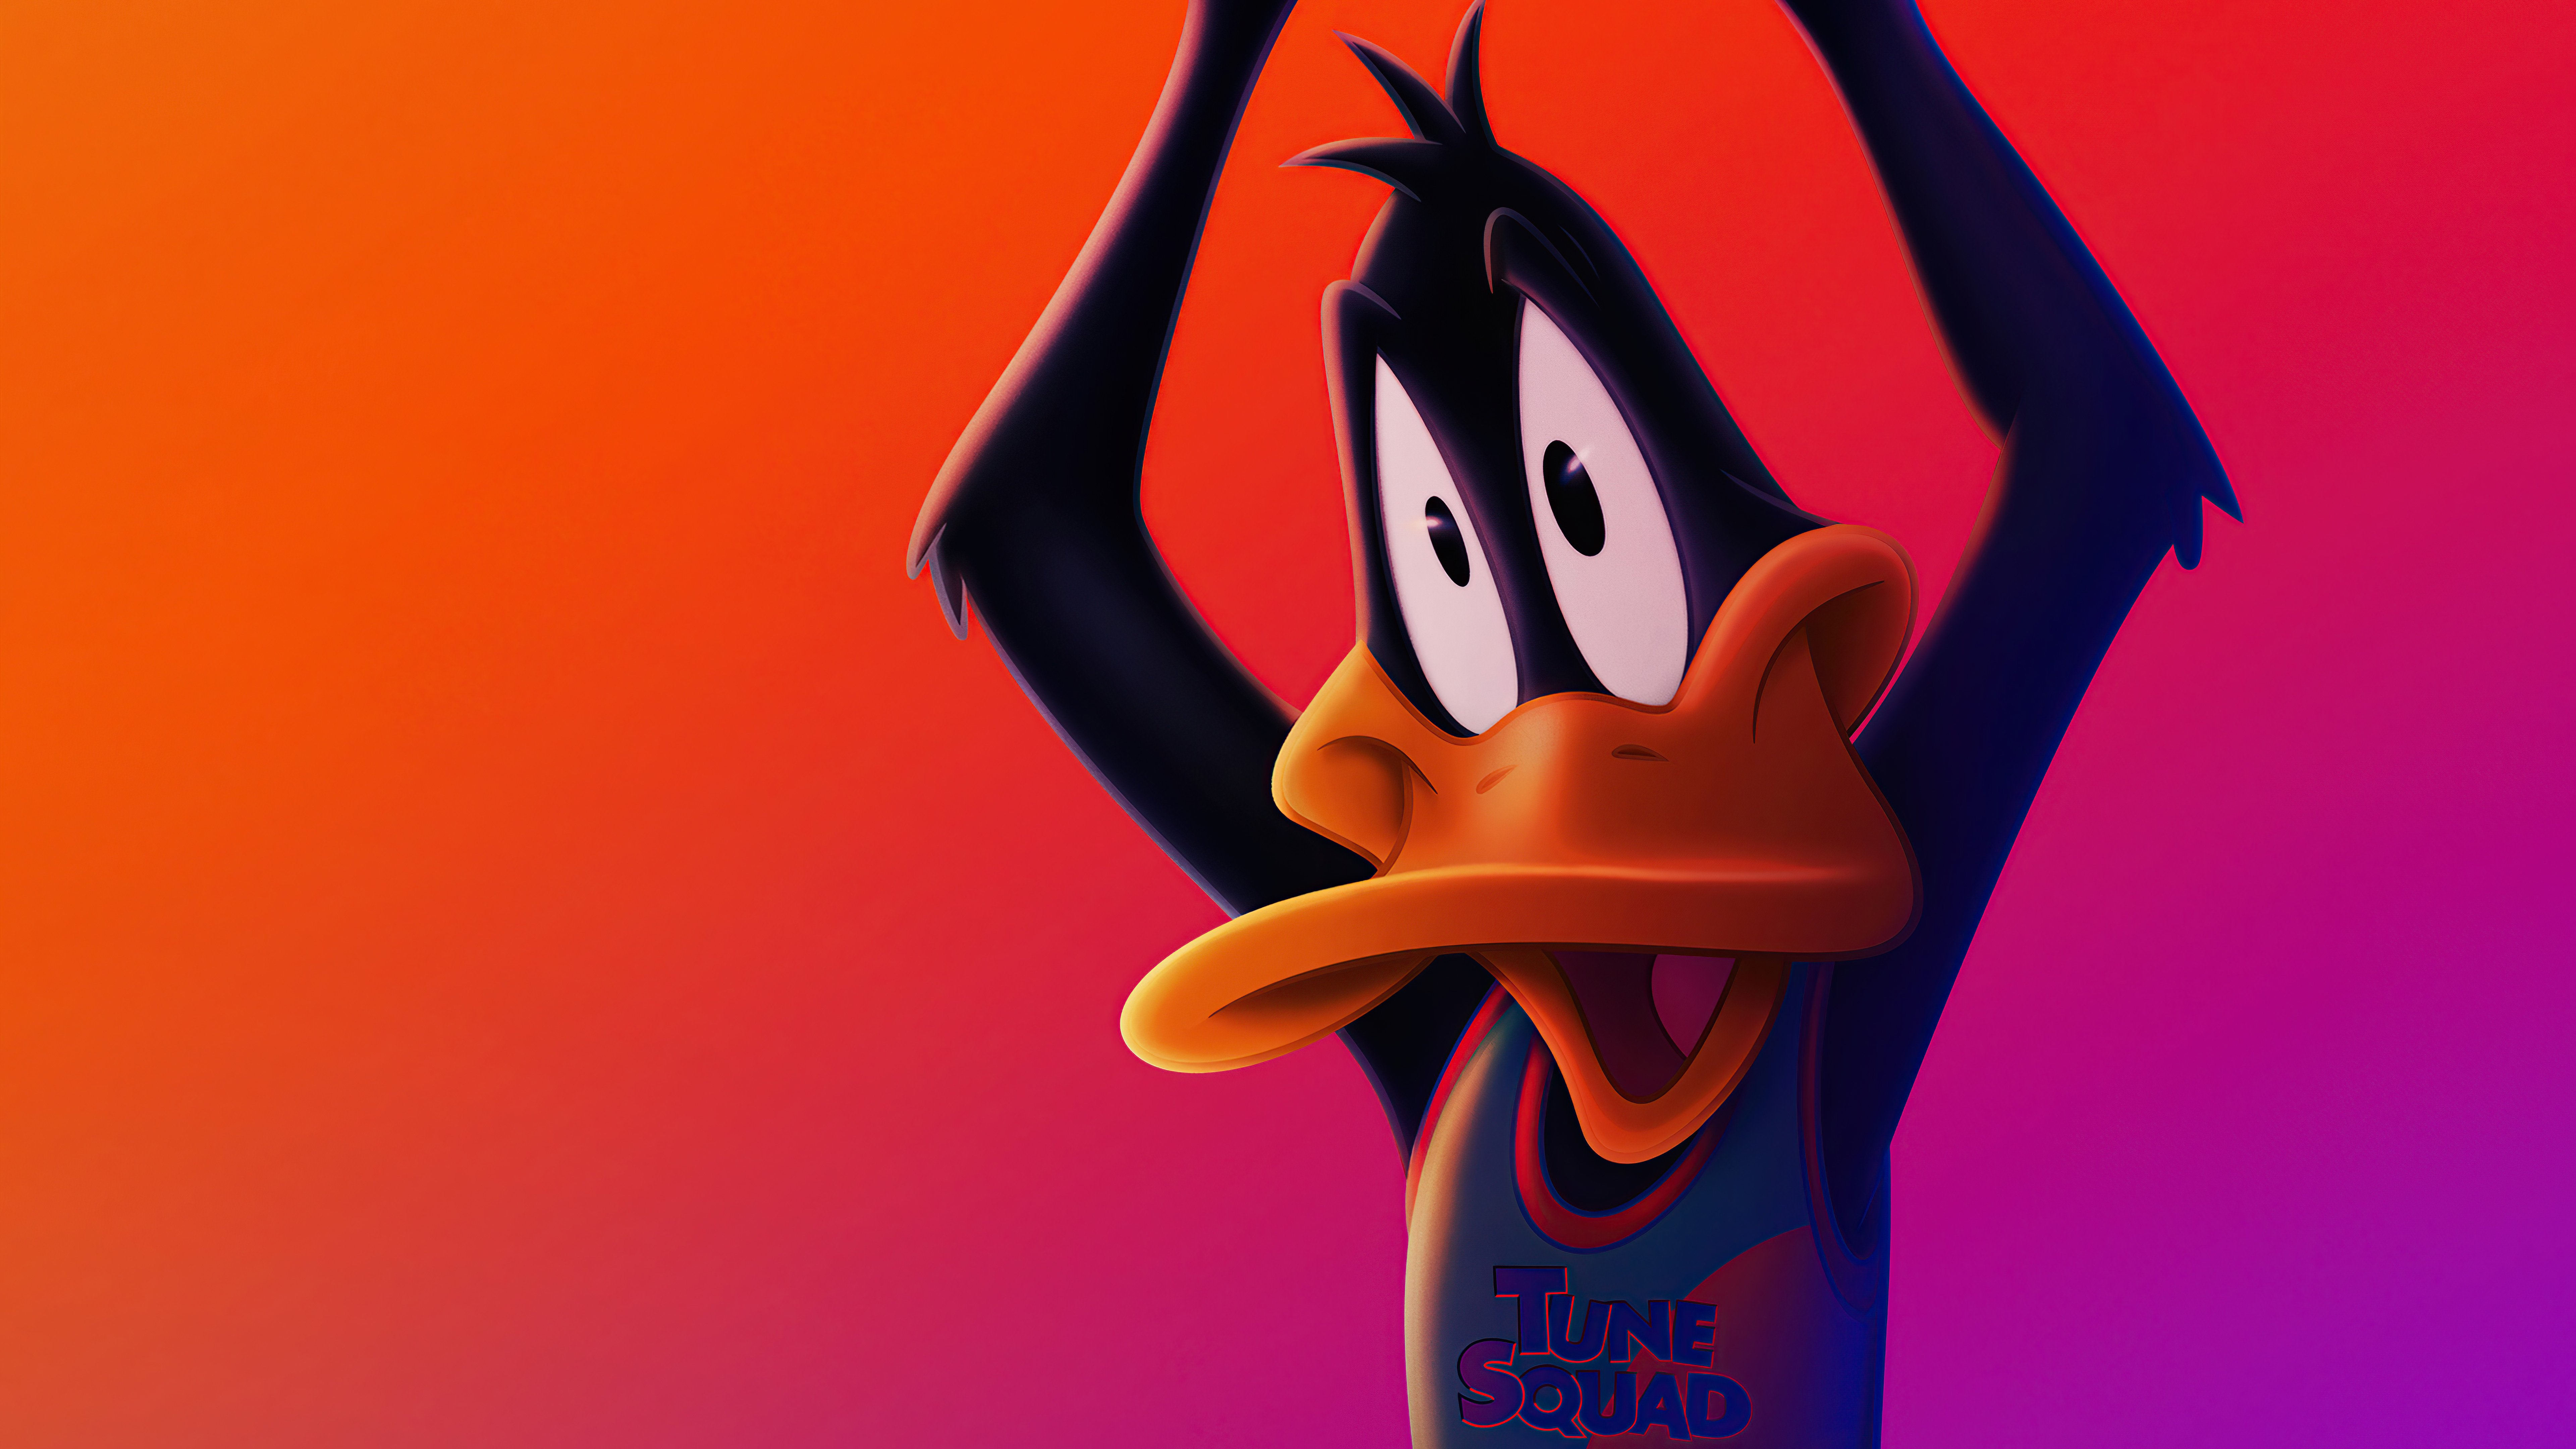 Wallpaper Daffy Duck Space Jam A new Legacy